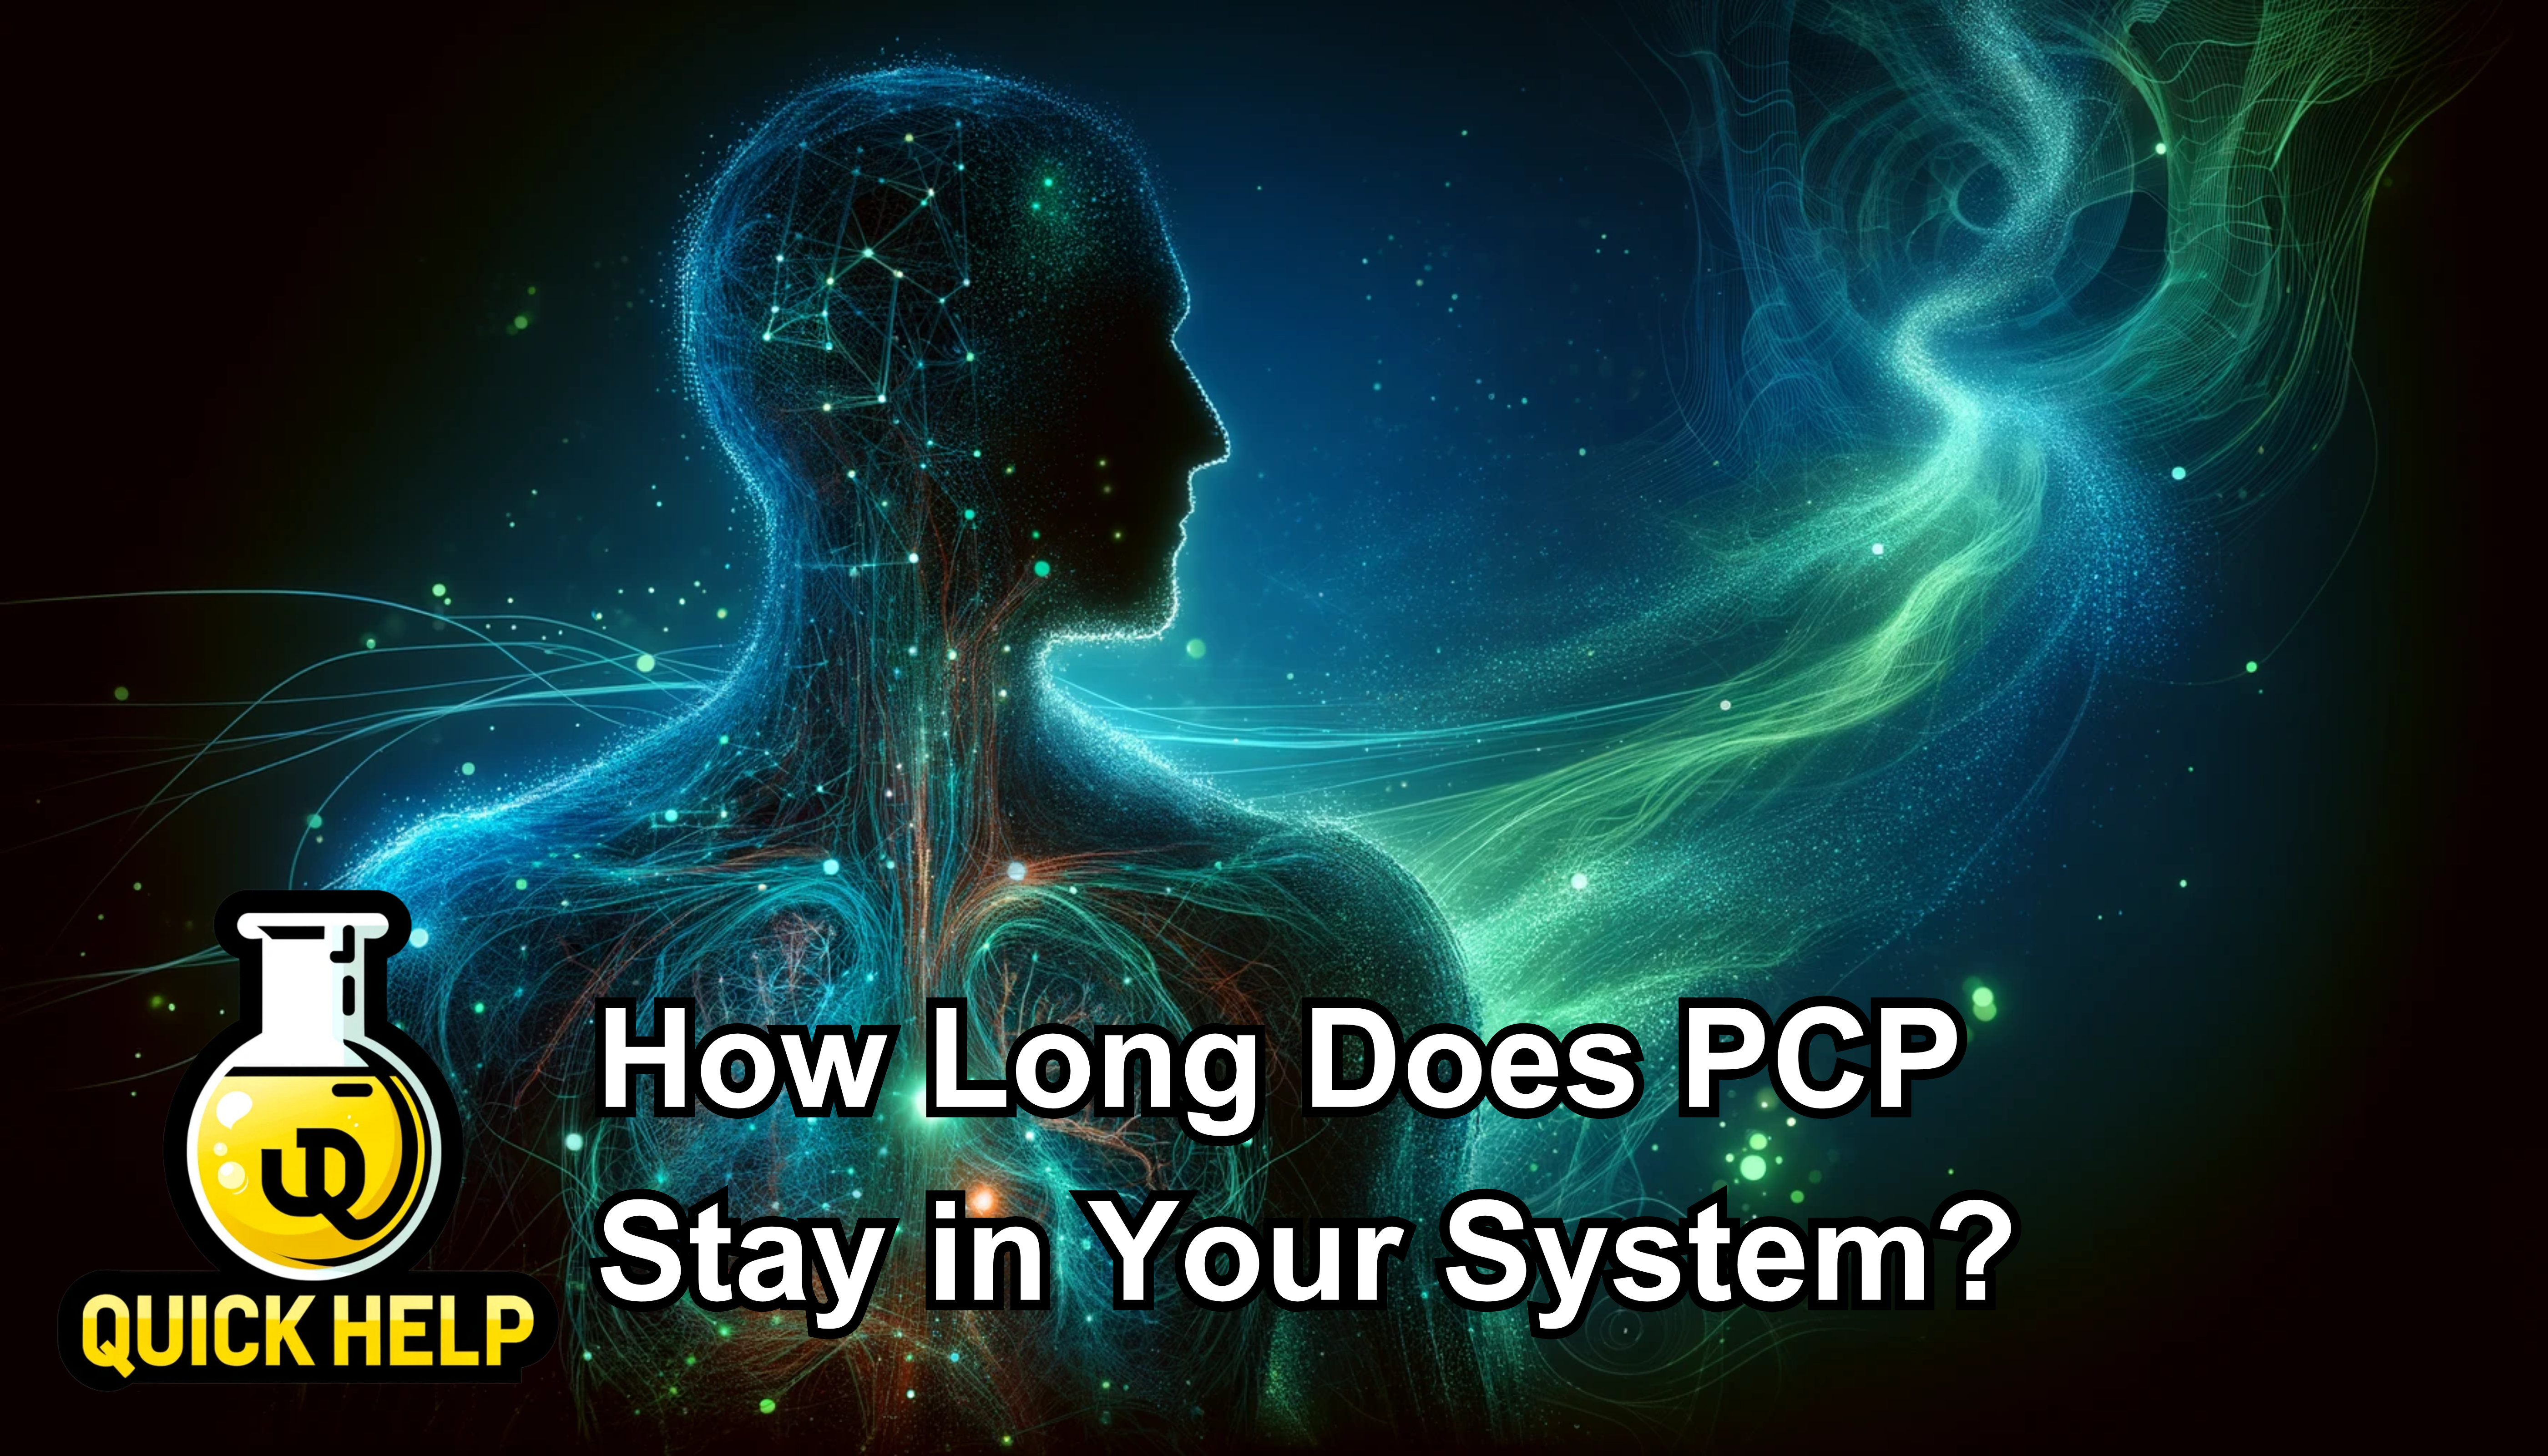 How Long Does PCP Stay in Your System? (Urine)